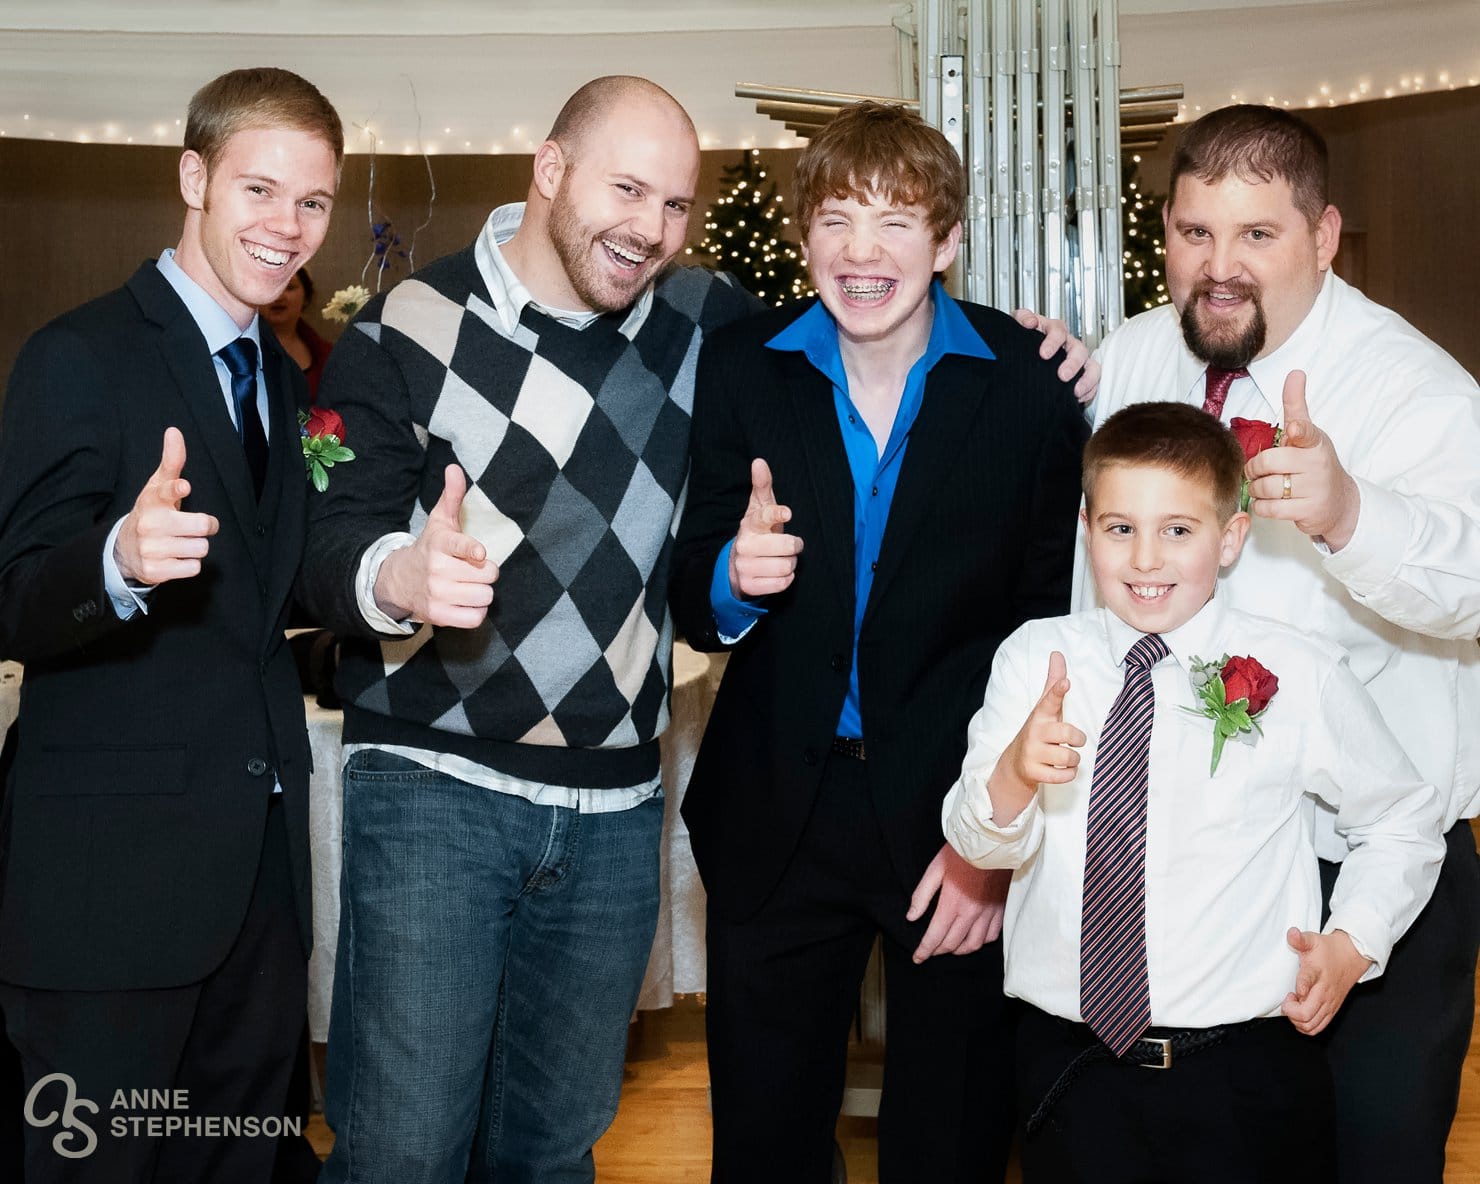 The groom and several male members of his family pose for a photo.